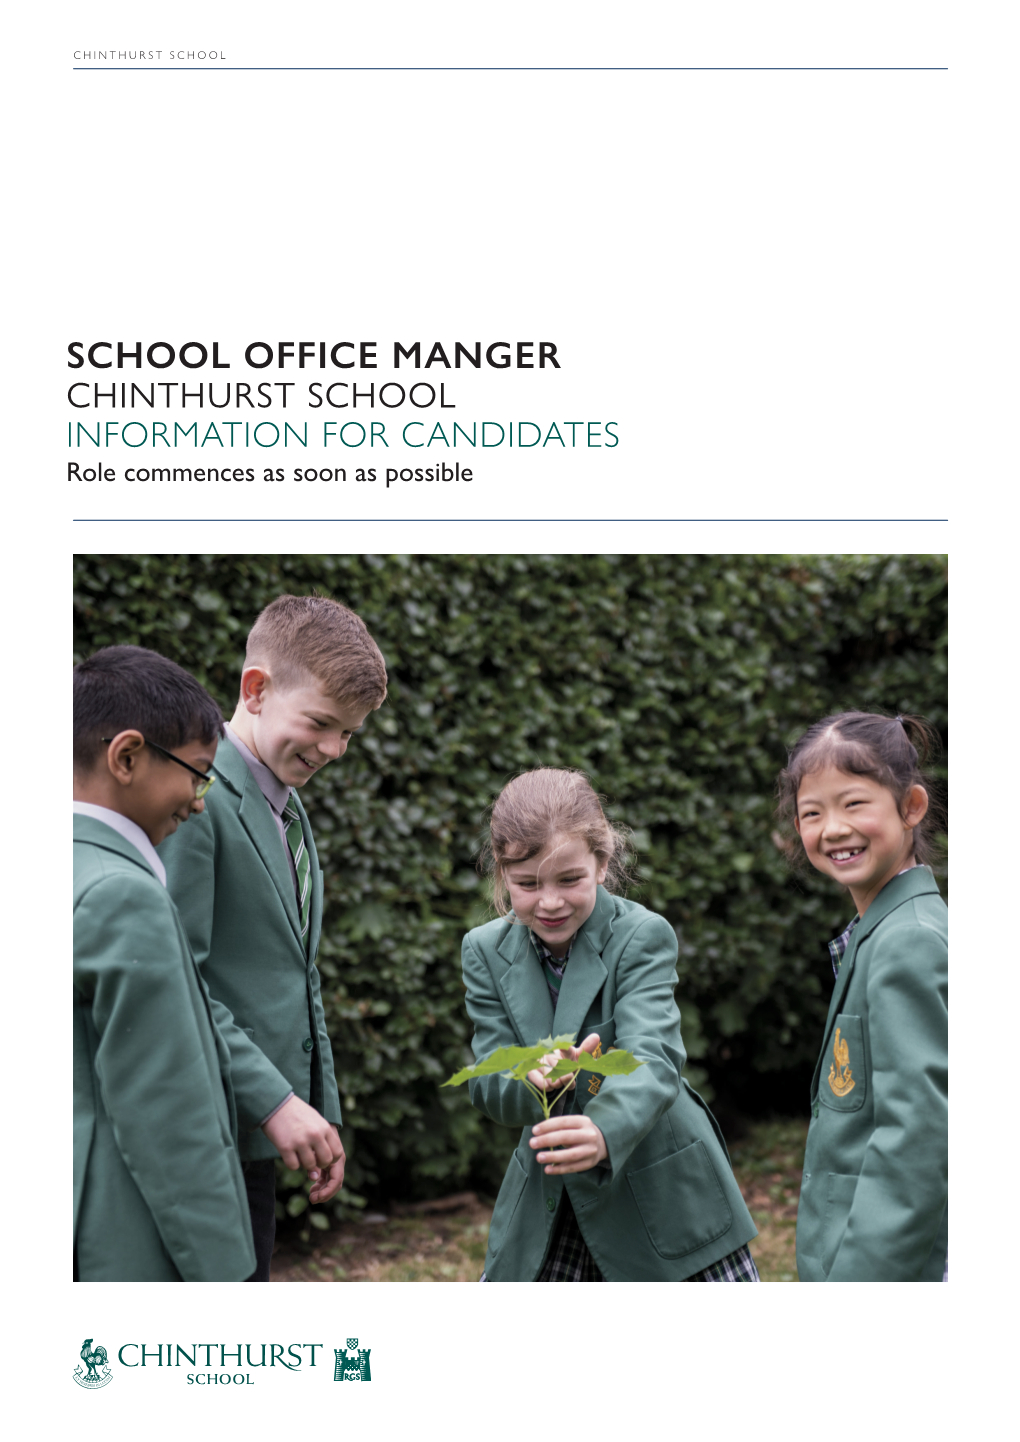 School Office Manger at Chinthurst School Duties and Responsibilities